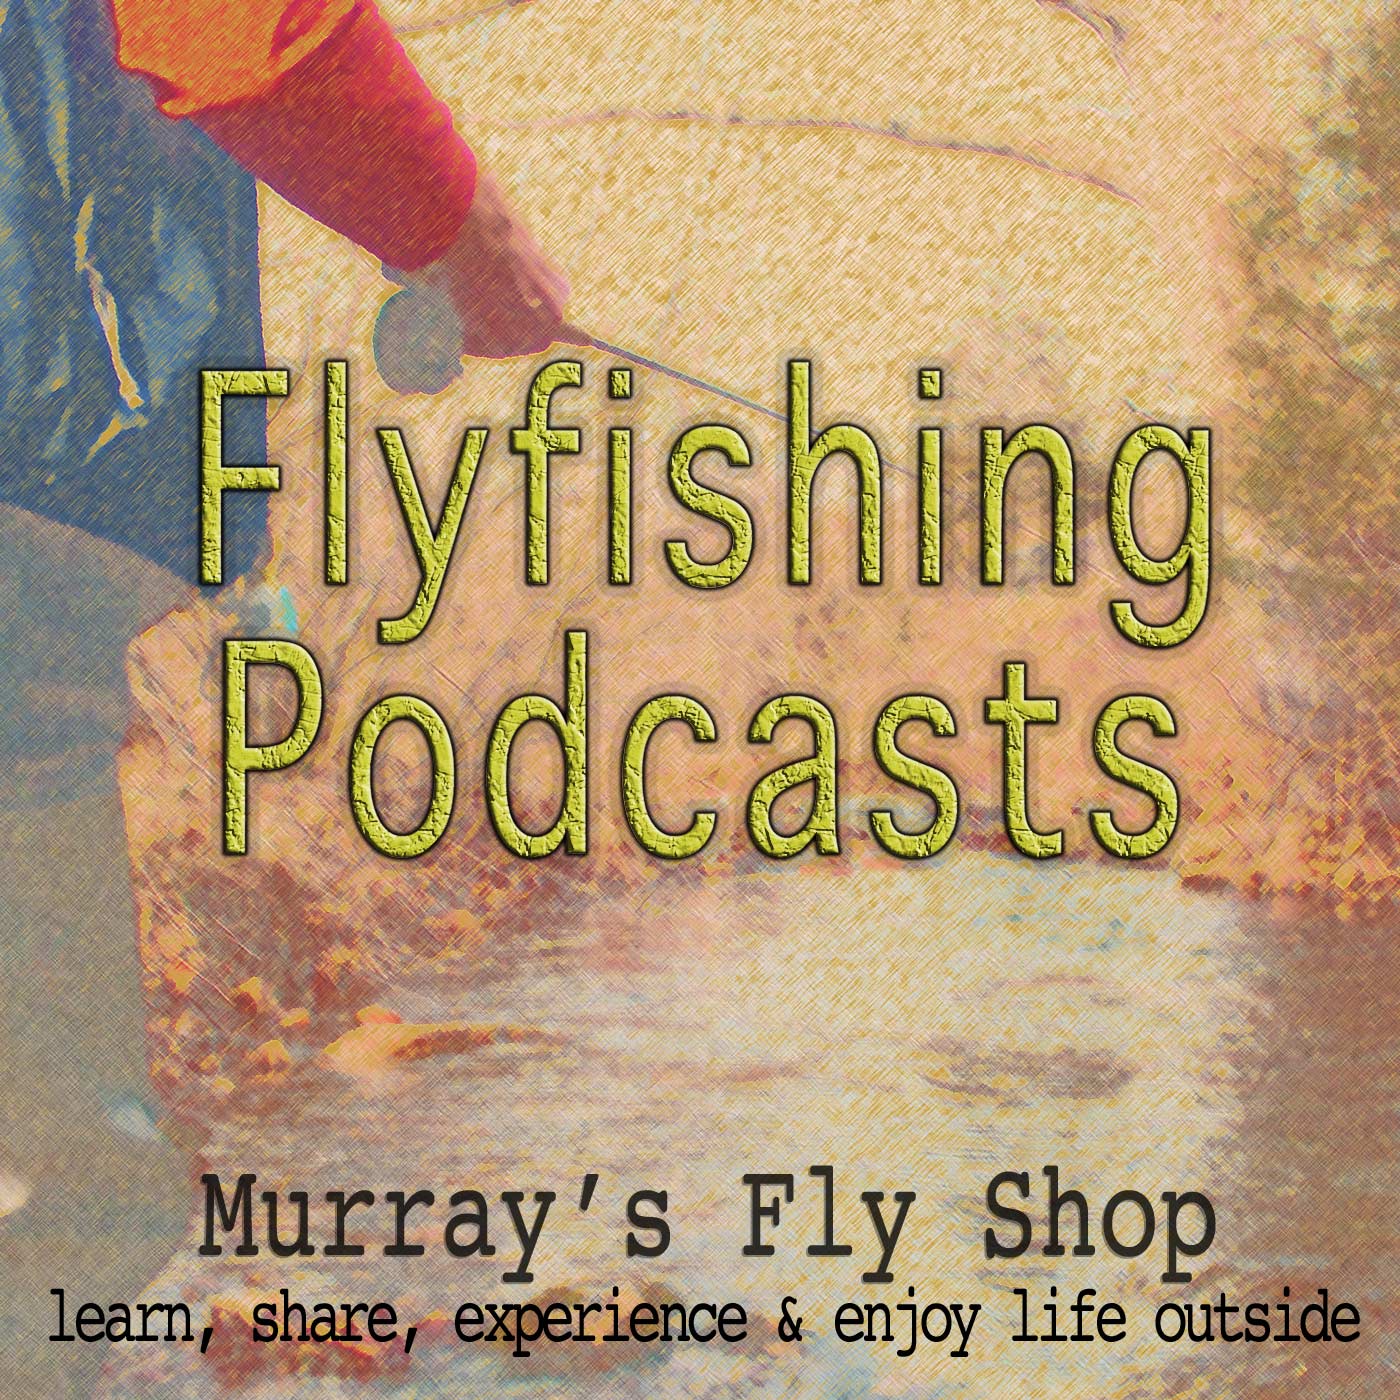 Murray's Fly Shop Fly Fishing Podcasts